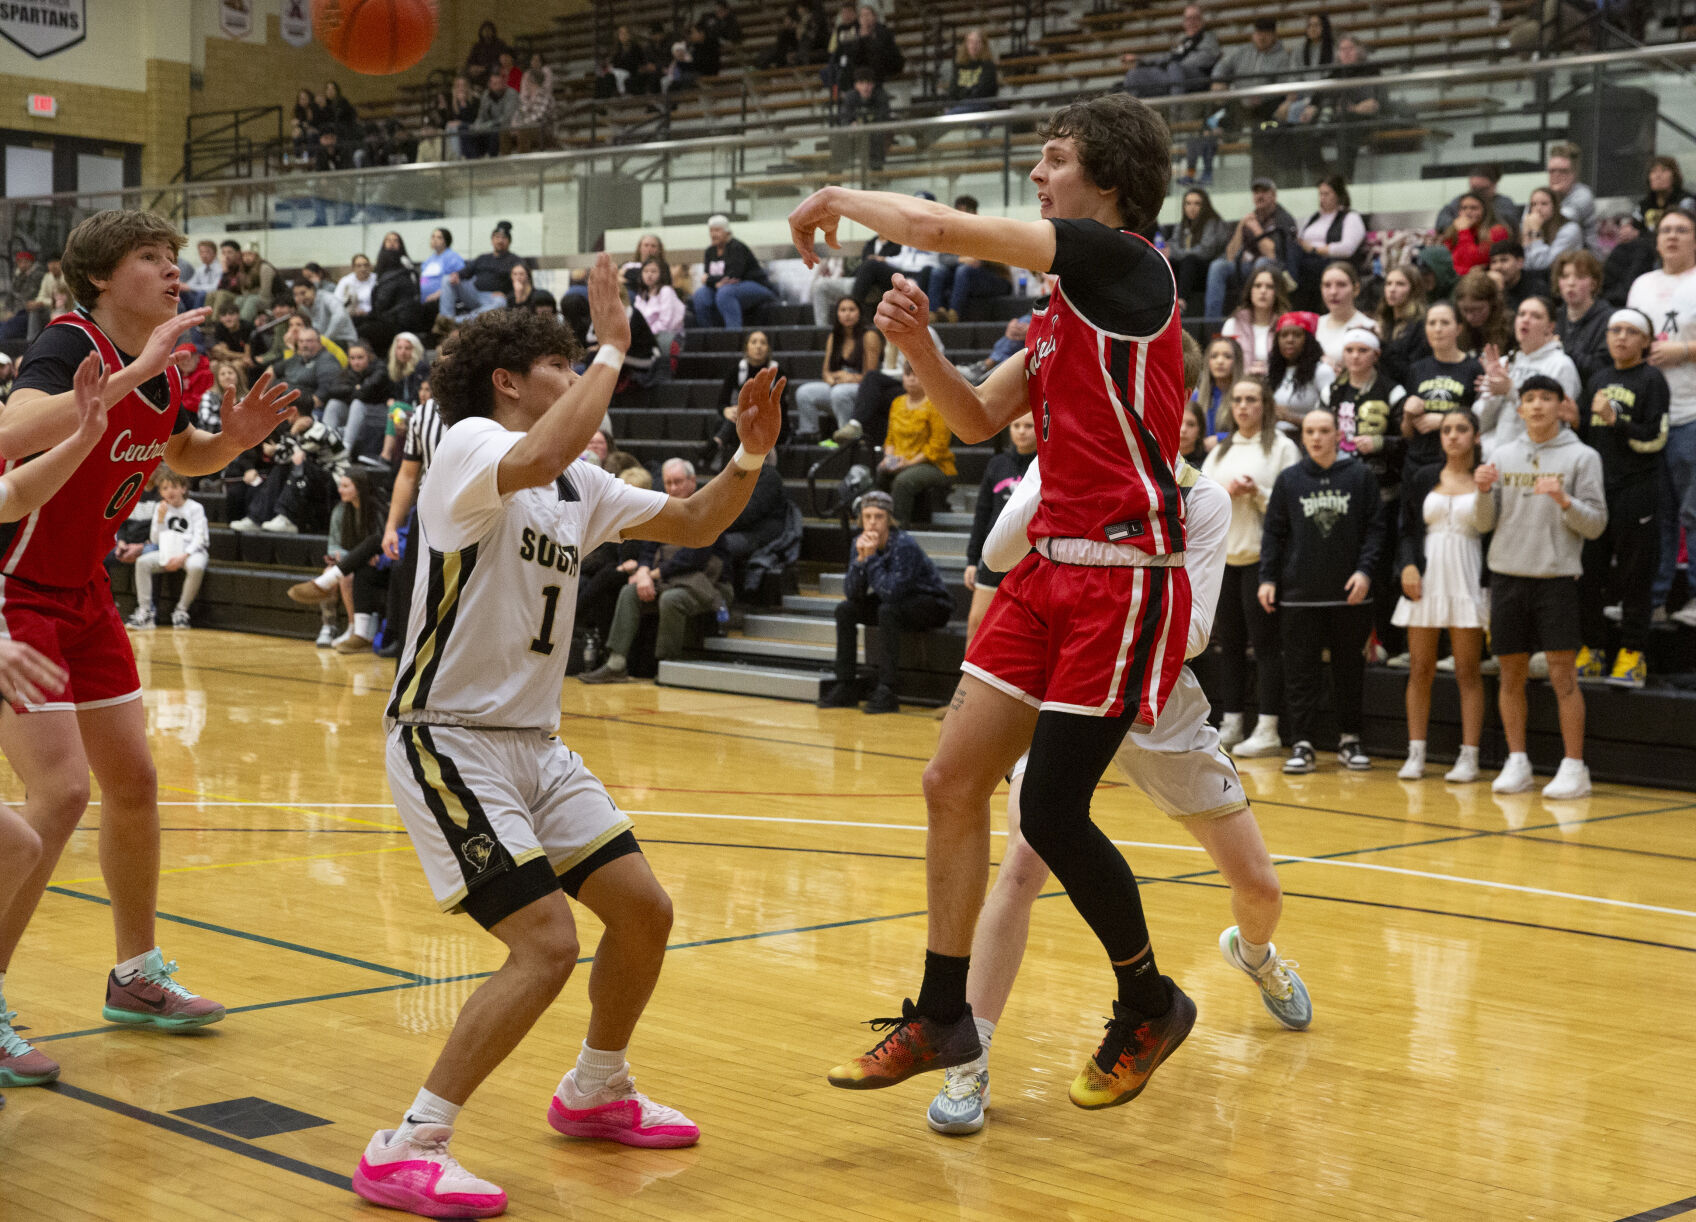 Cheyenne Central Boys Secure Dominant 71-28 Victory Over Rival Cheyenne South